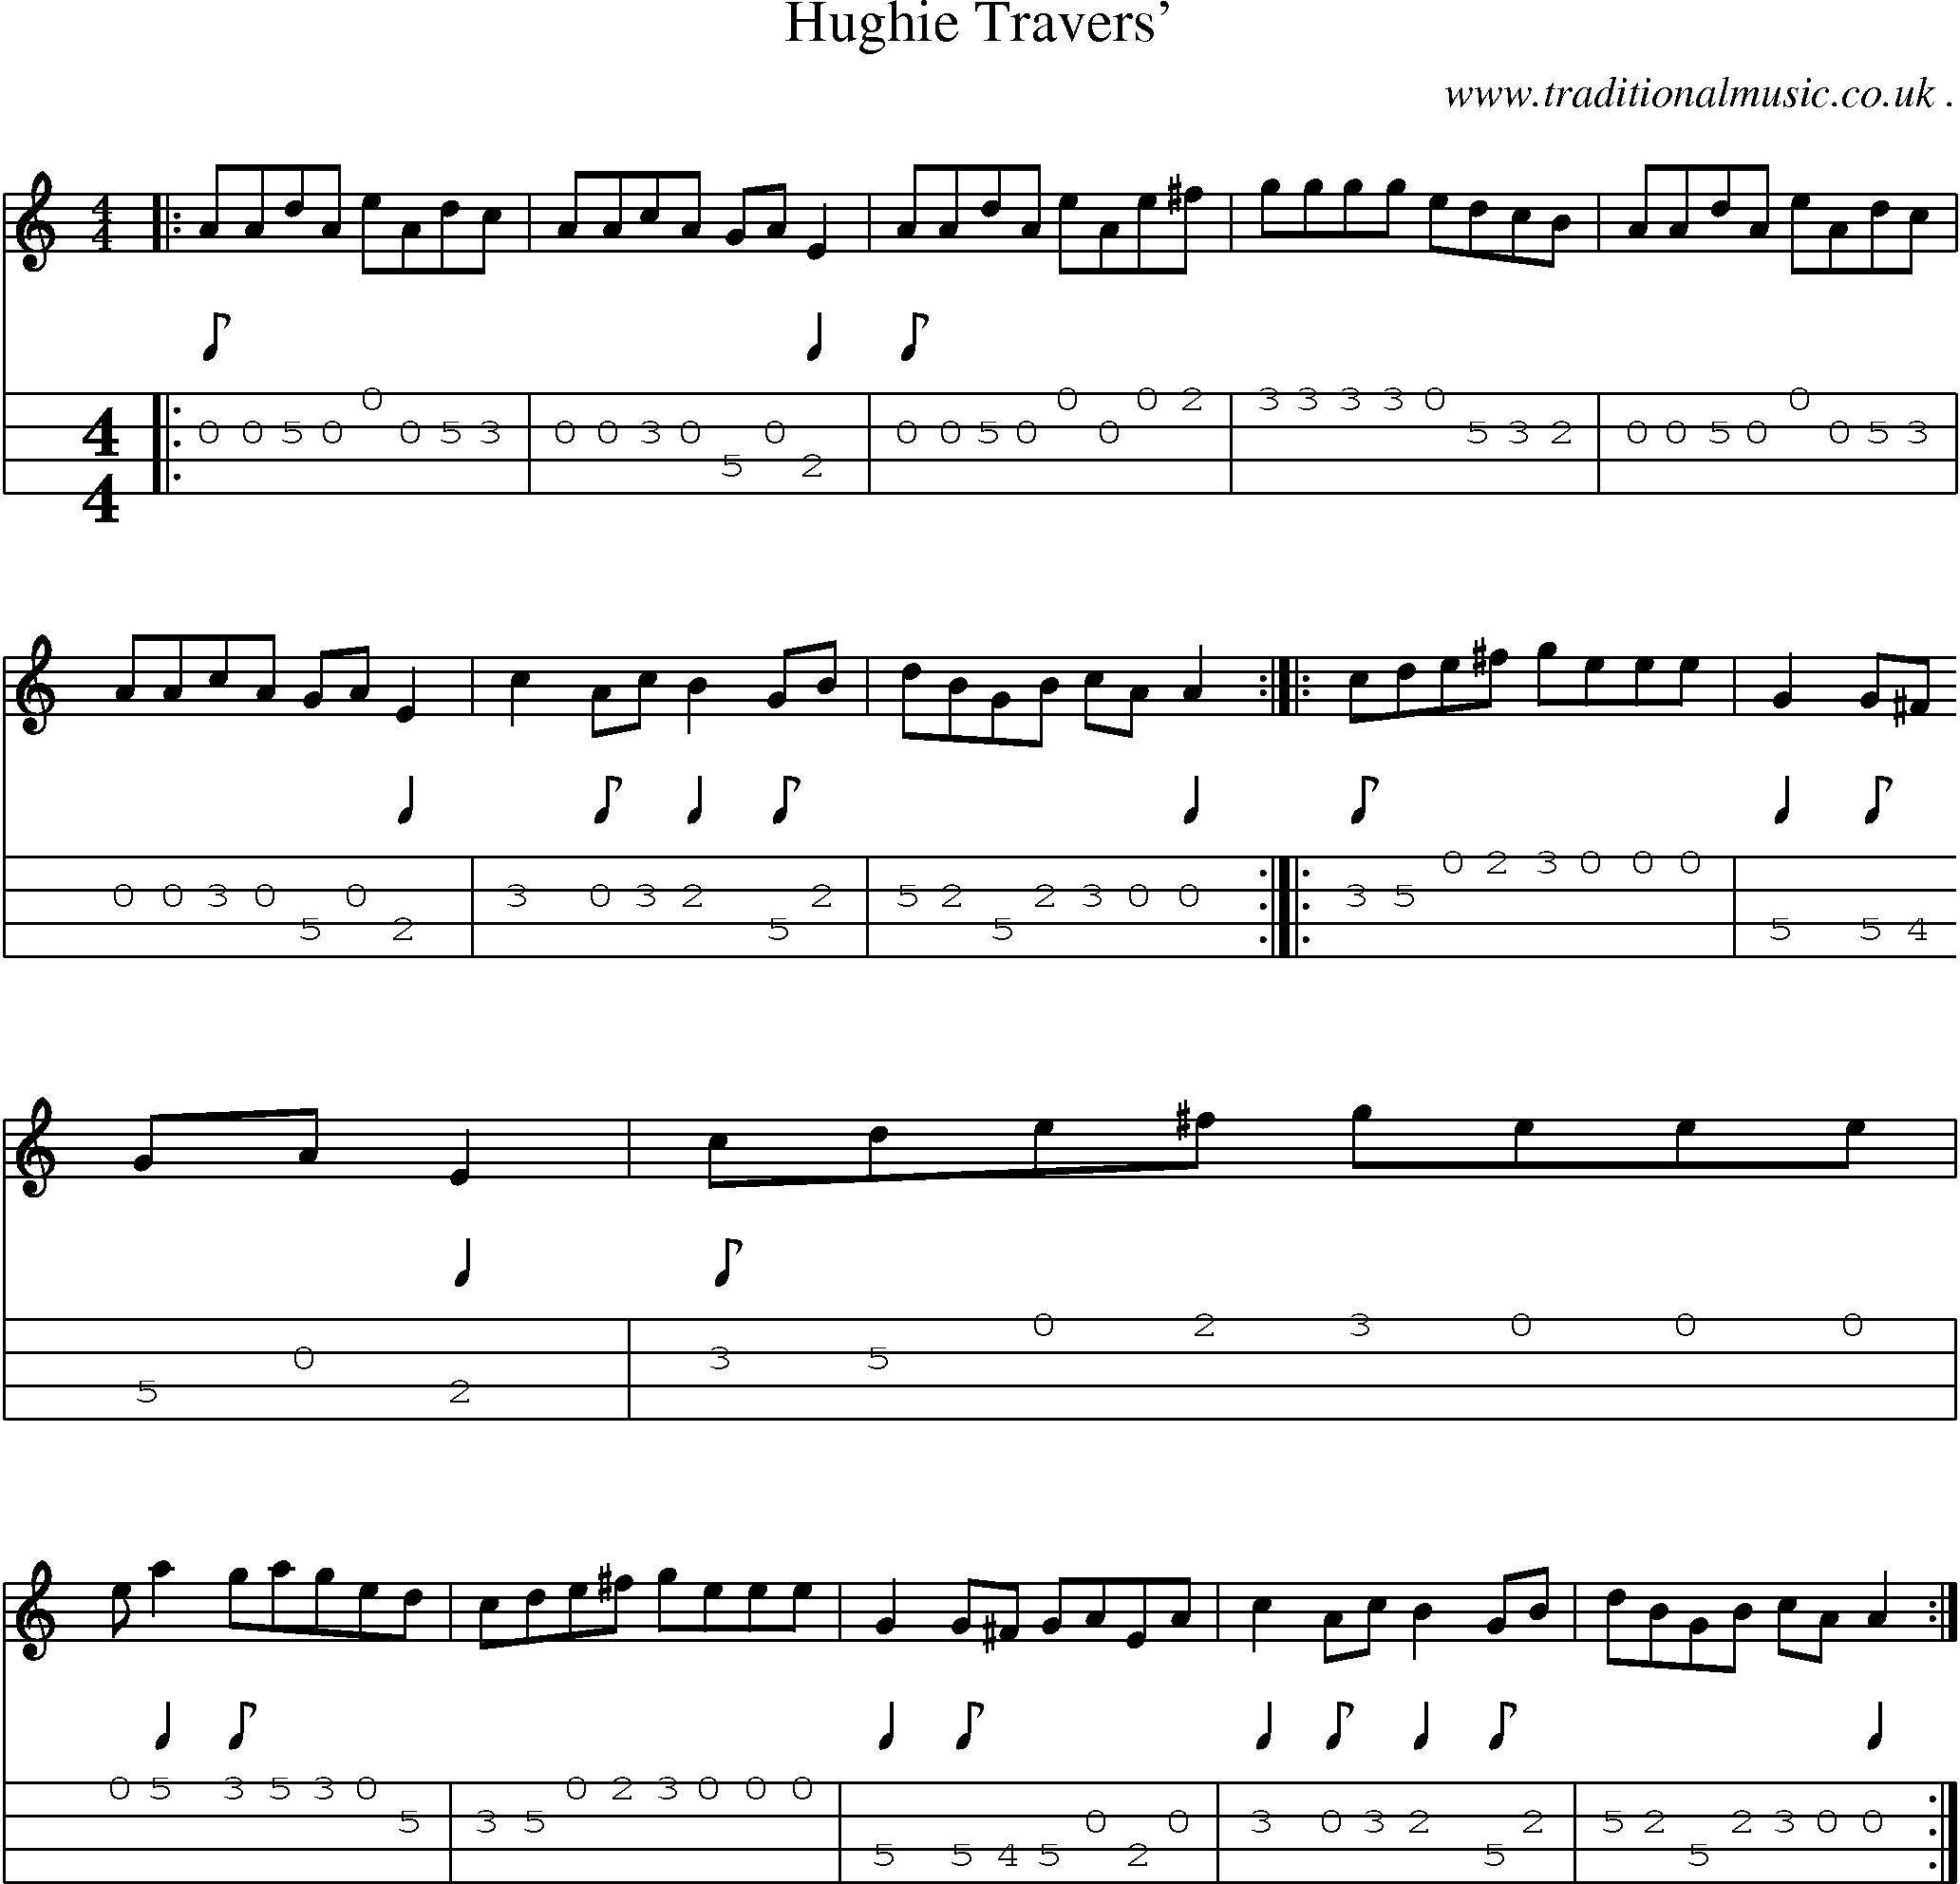 Music Score and Guitar Tabs for Hughie Travers